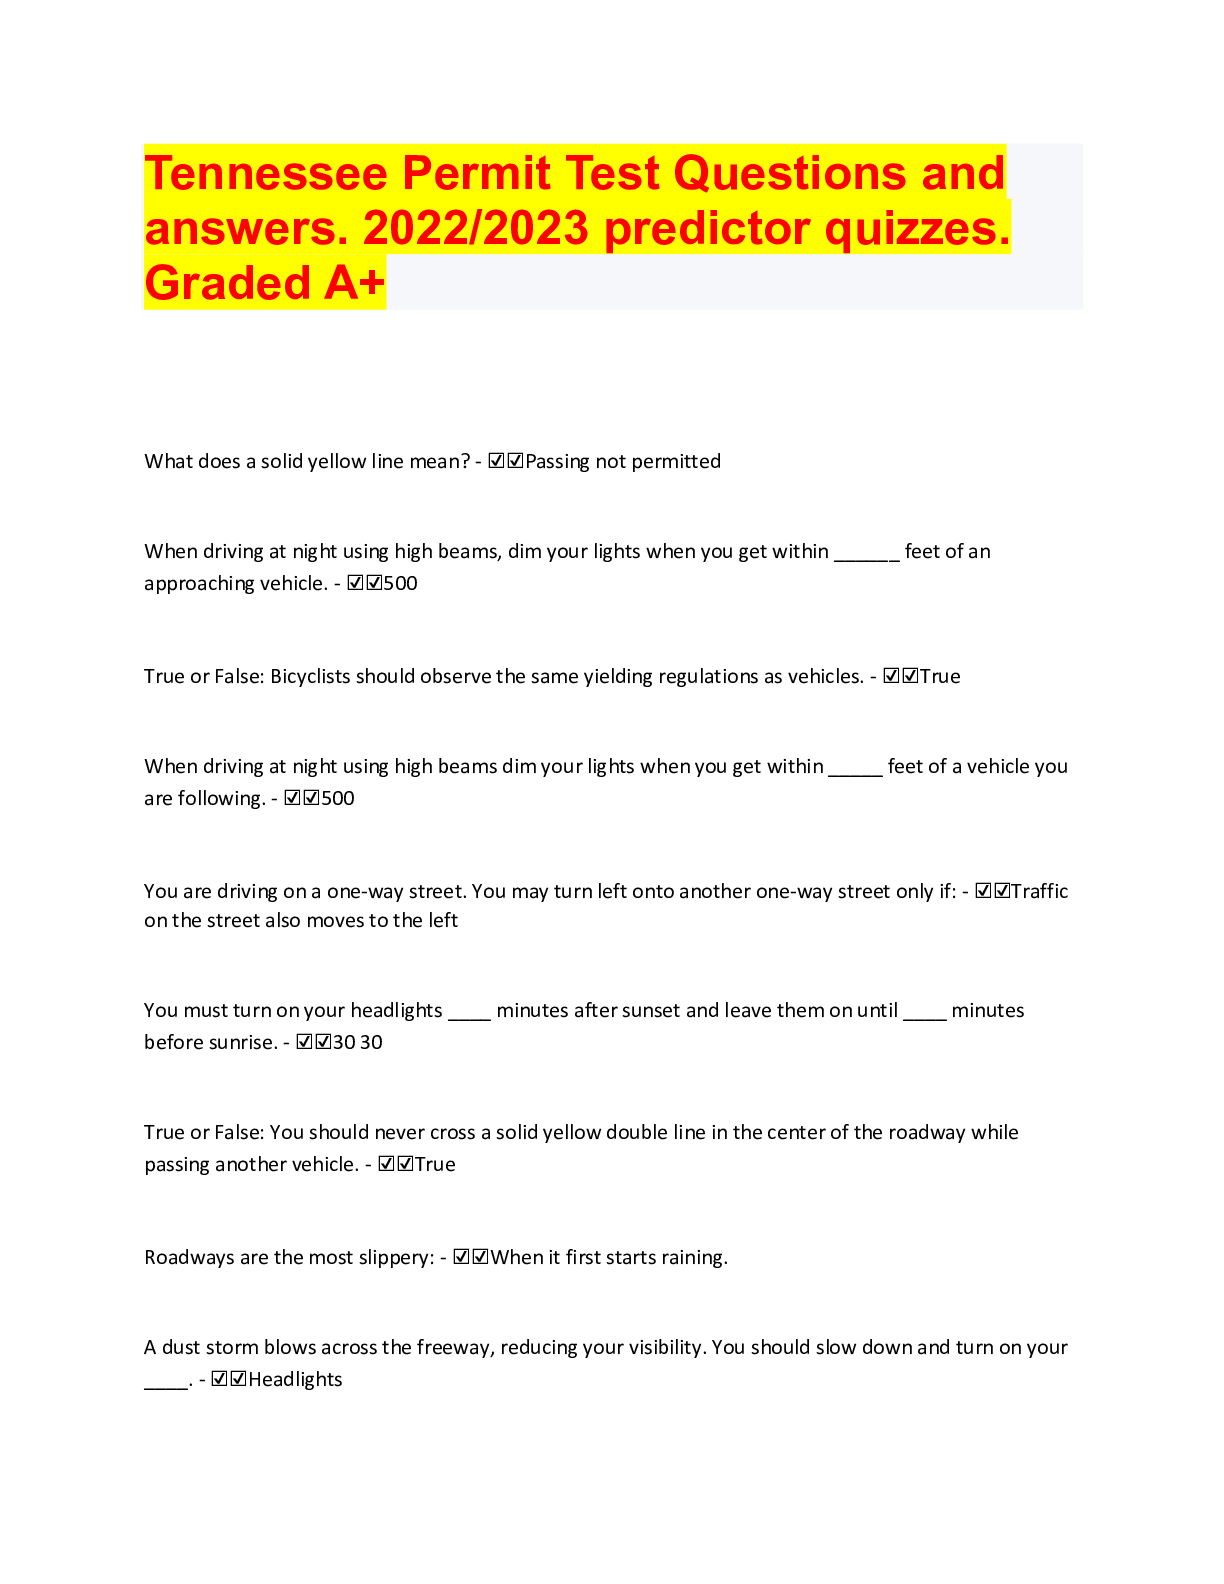 Tennessee Permit Test Questions and answers. 2022/2023 predictor